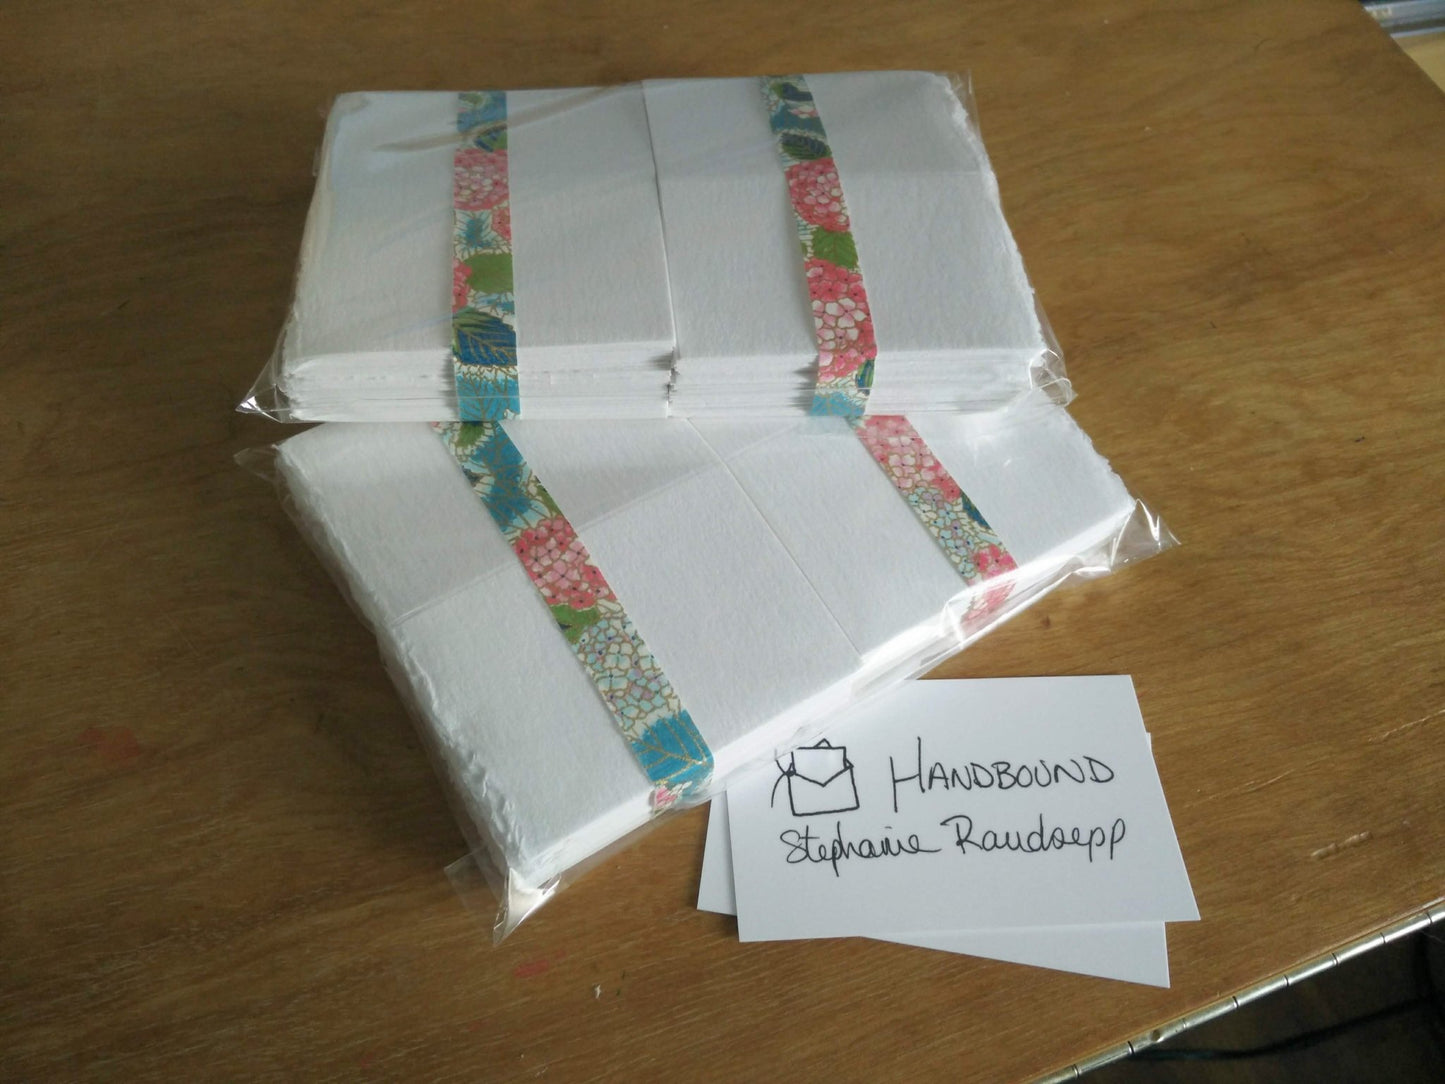 Deckled edged cotton rag place cards